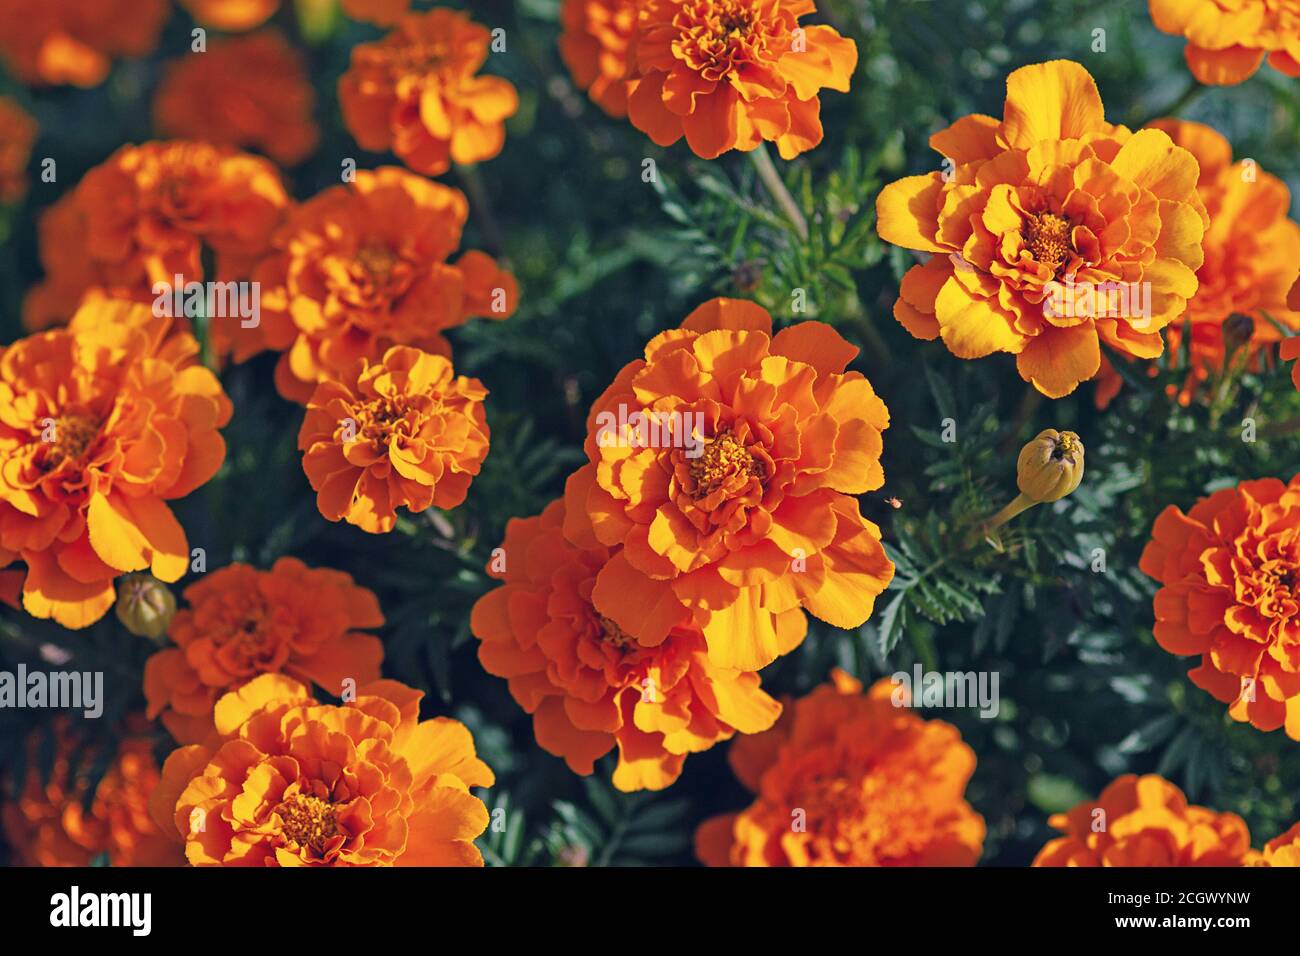 Marigold flowers top view (Tagetes erecta L. ) close up Stock Photo